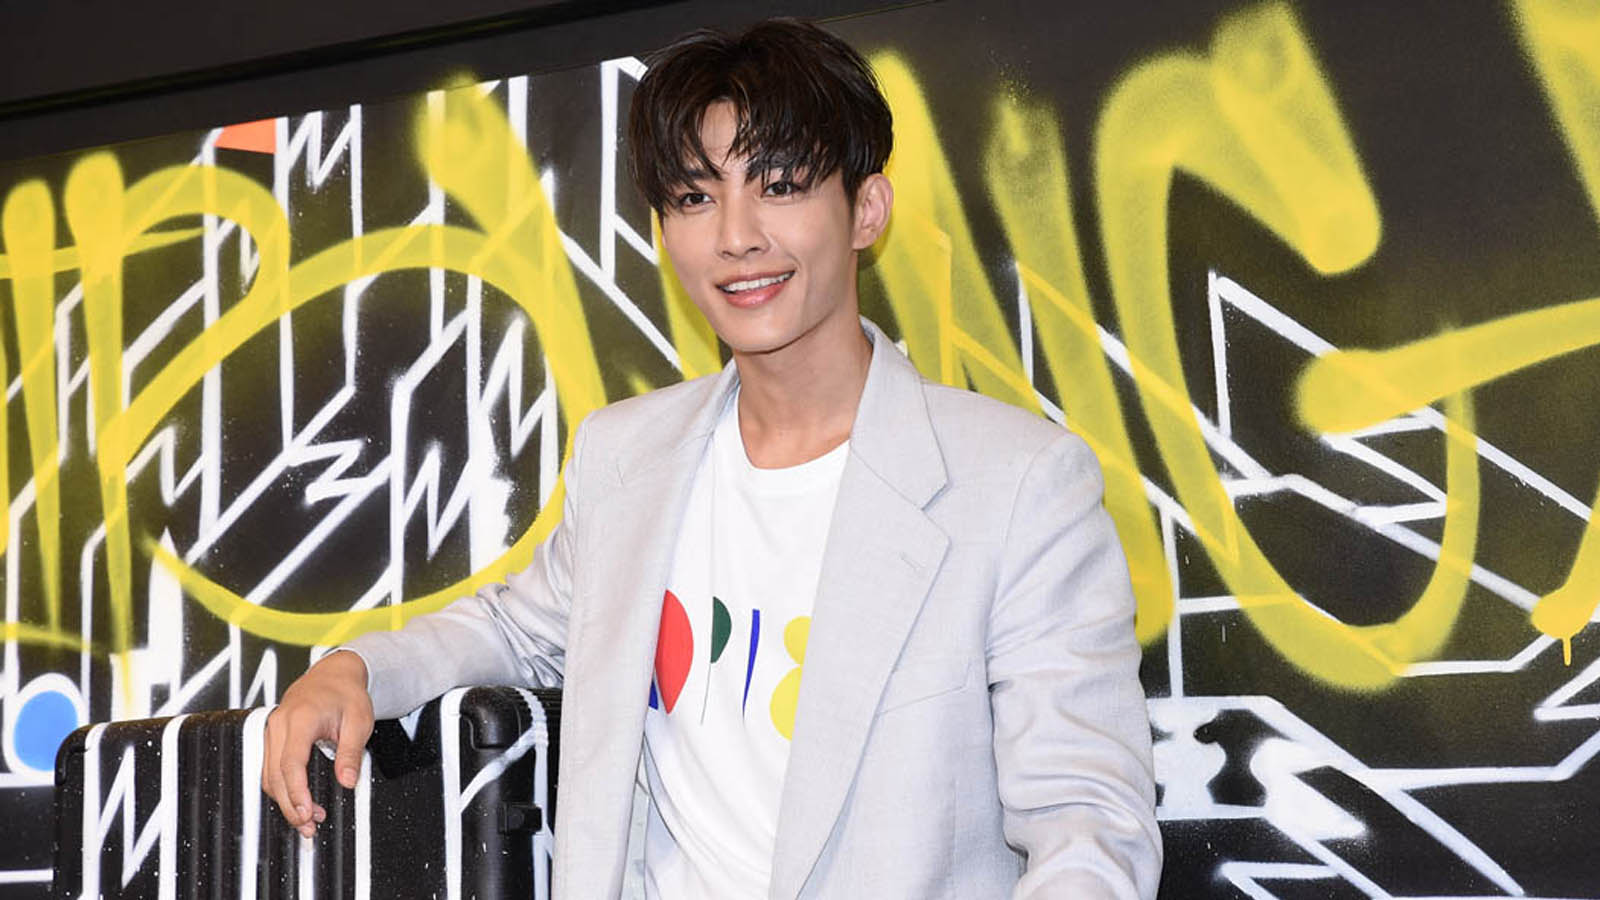 Aaron Yan parts ways with HIM International Music after 15 years - 8days